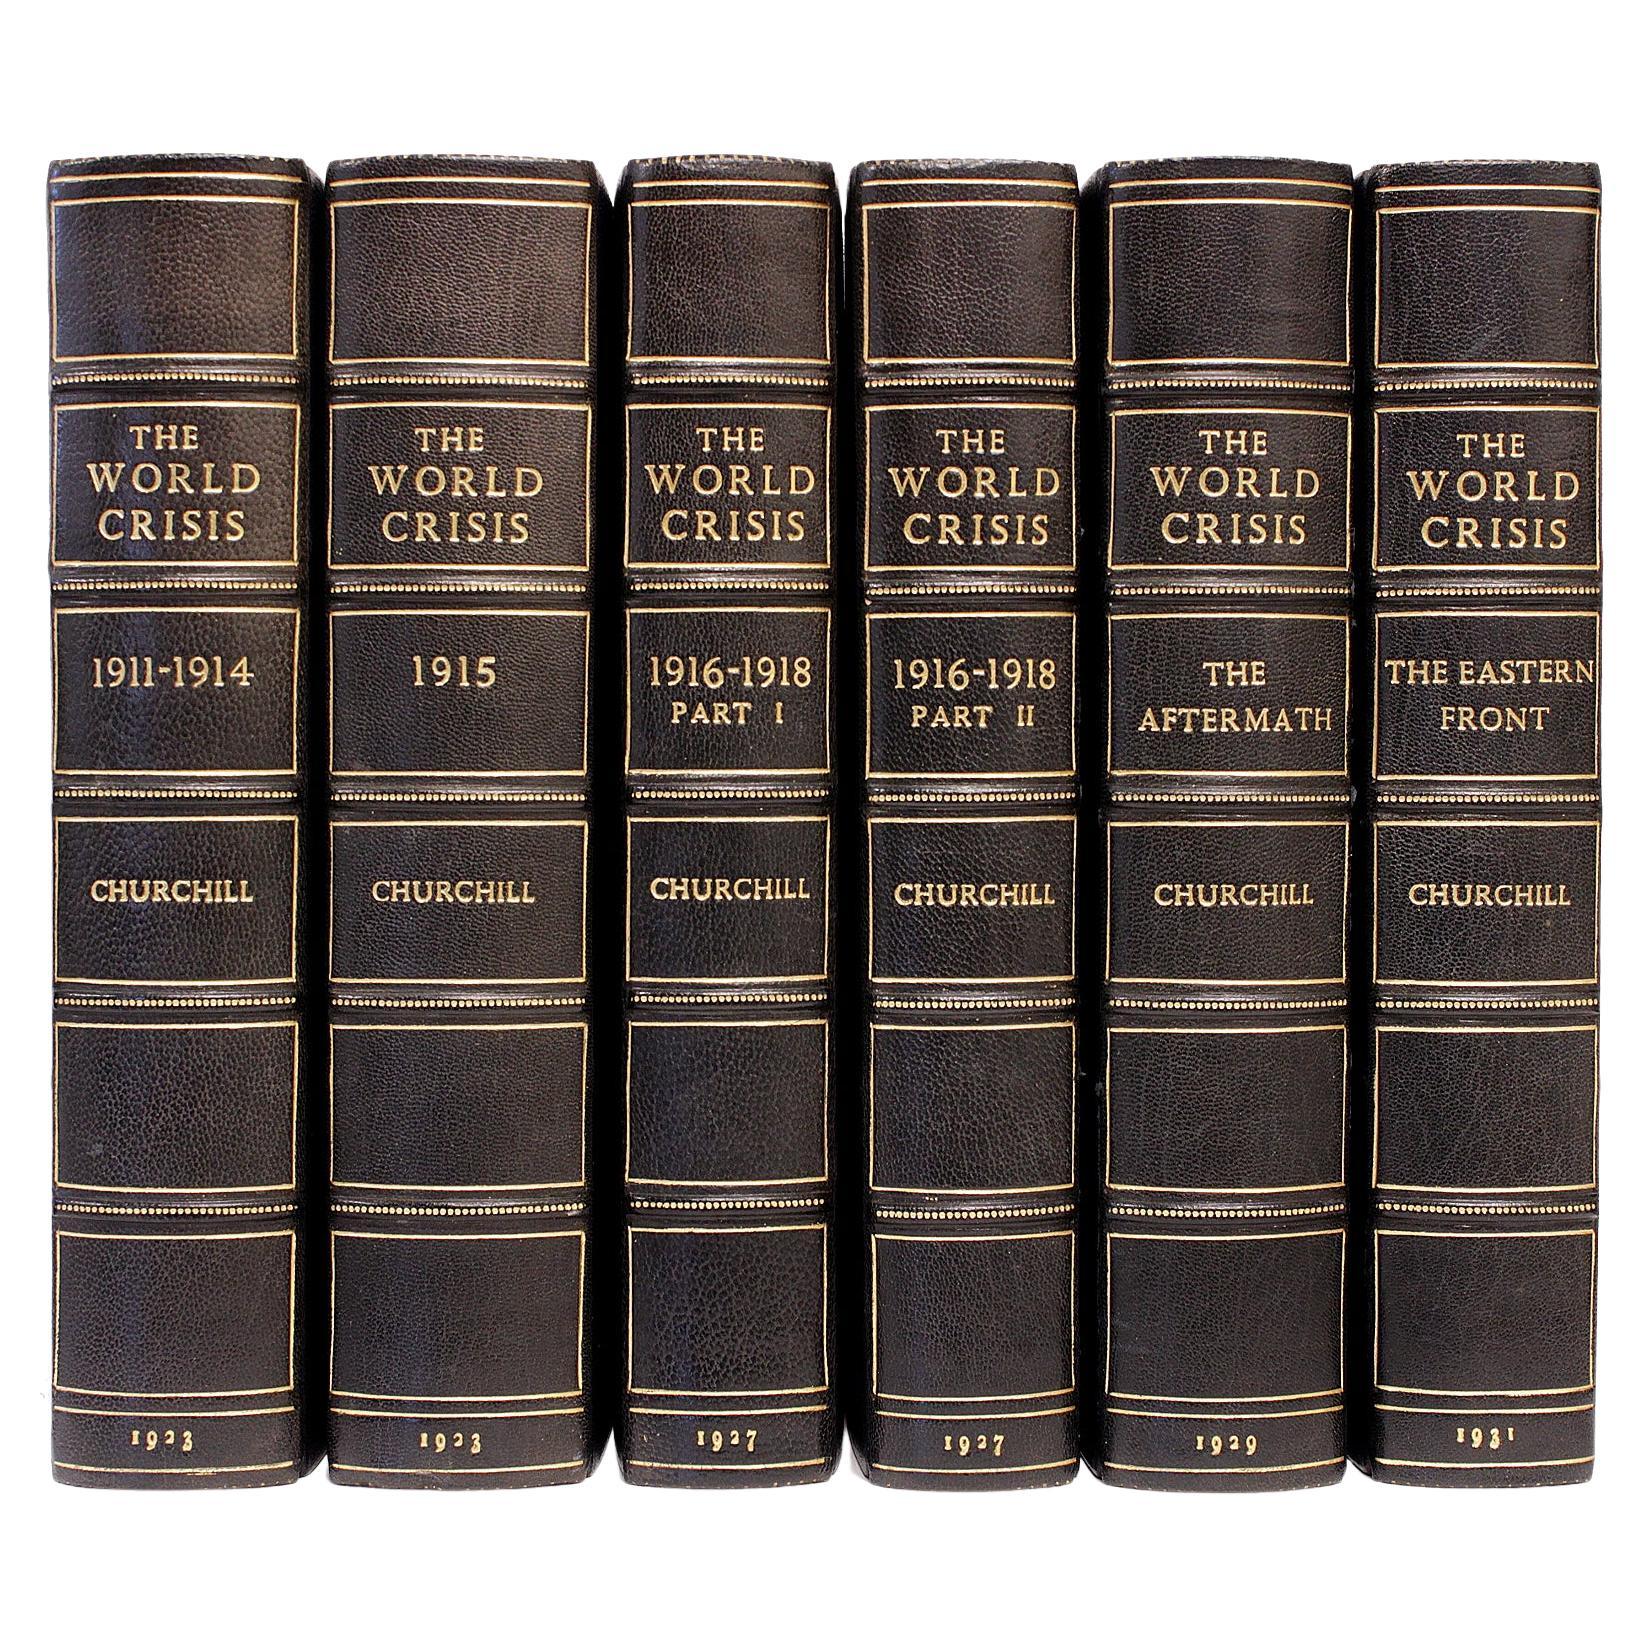 Winston CHURCHILL. The World Crisis - 6 vols. - ALL FIRST EDITIONS 1923-1931 For Sale